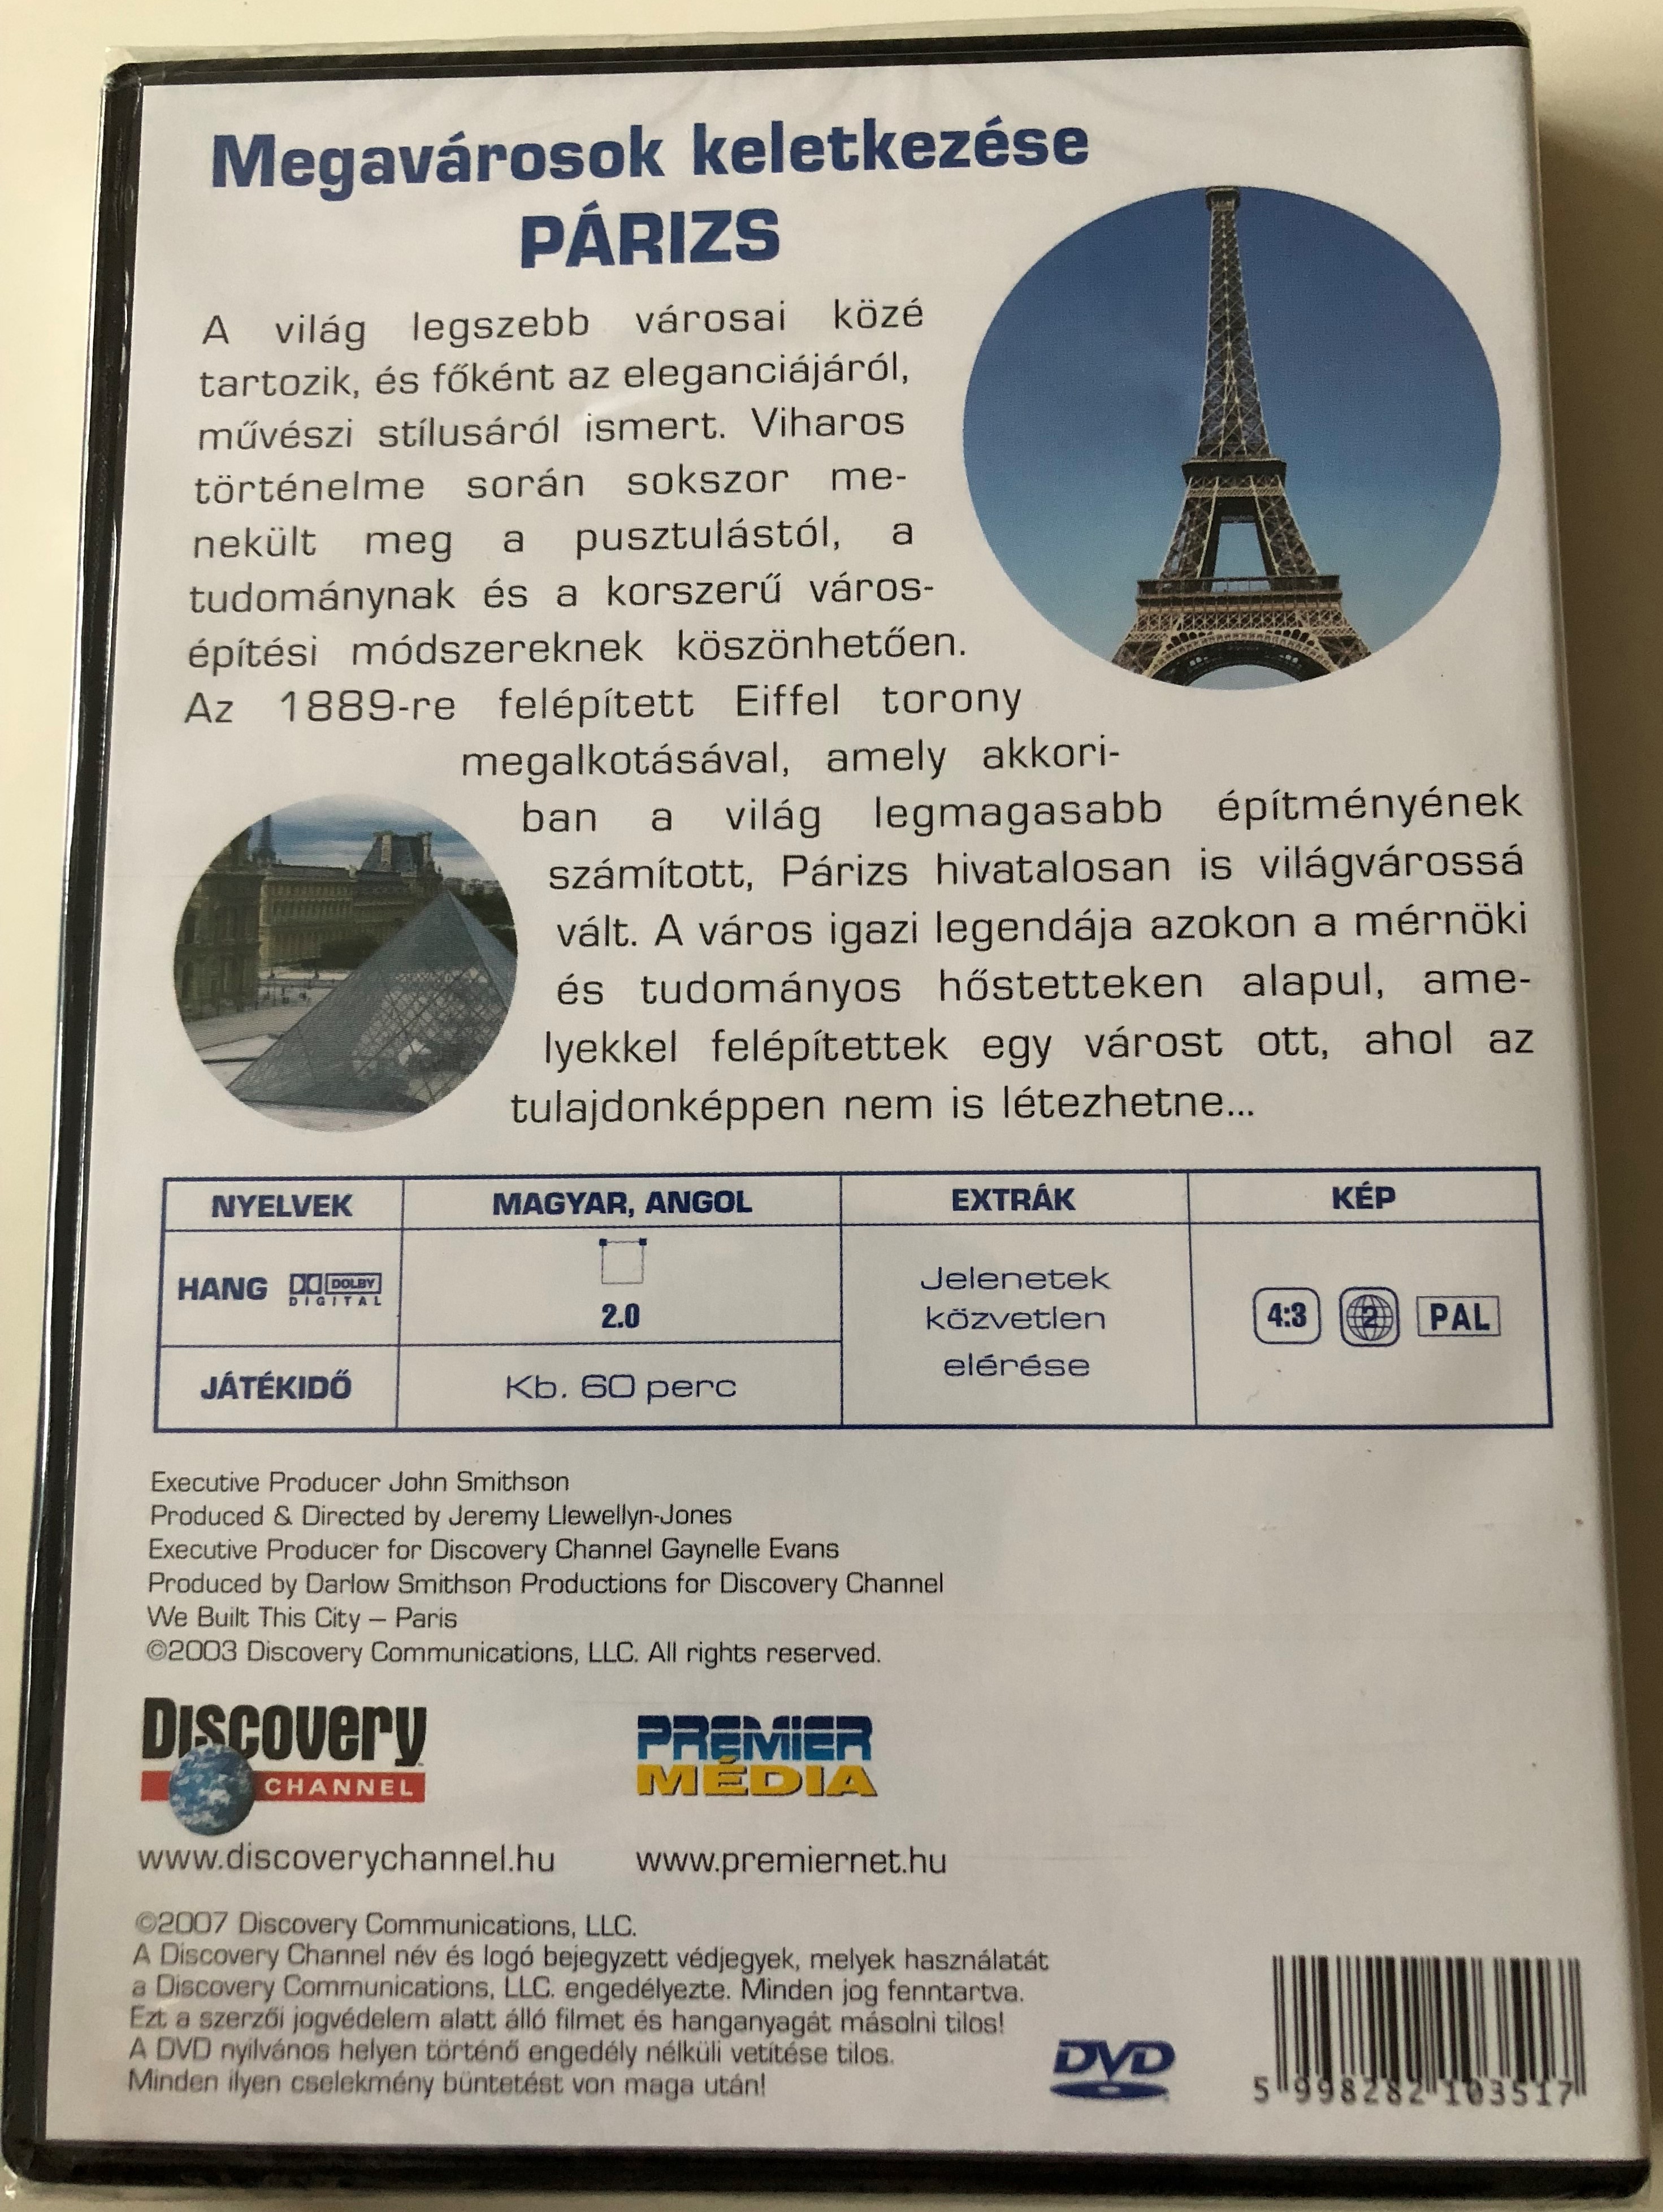 megav-rosok-keletkez-se-p-rizs-dvd-2003-we-built-this-city-paris-discovery-channel-series-produced-and-directed-by-jeremy-llewellyn-jones-2-.jpg